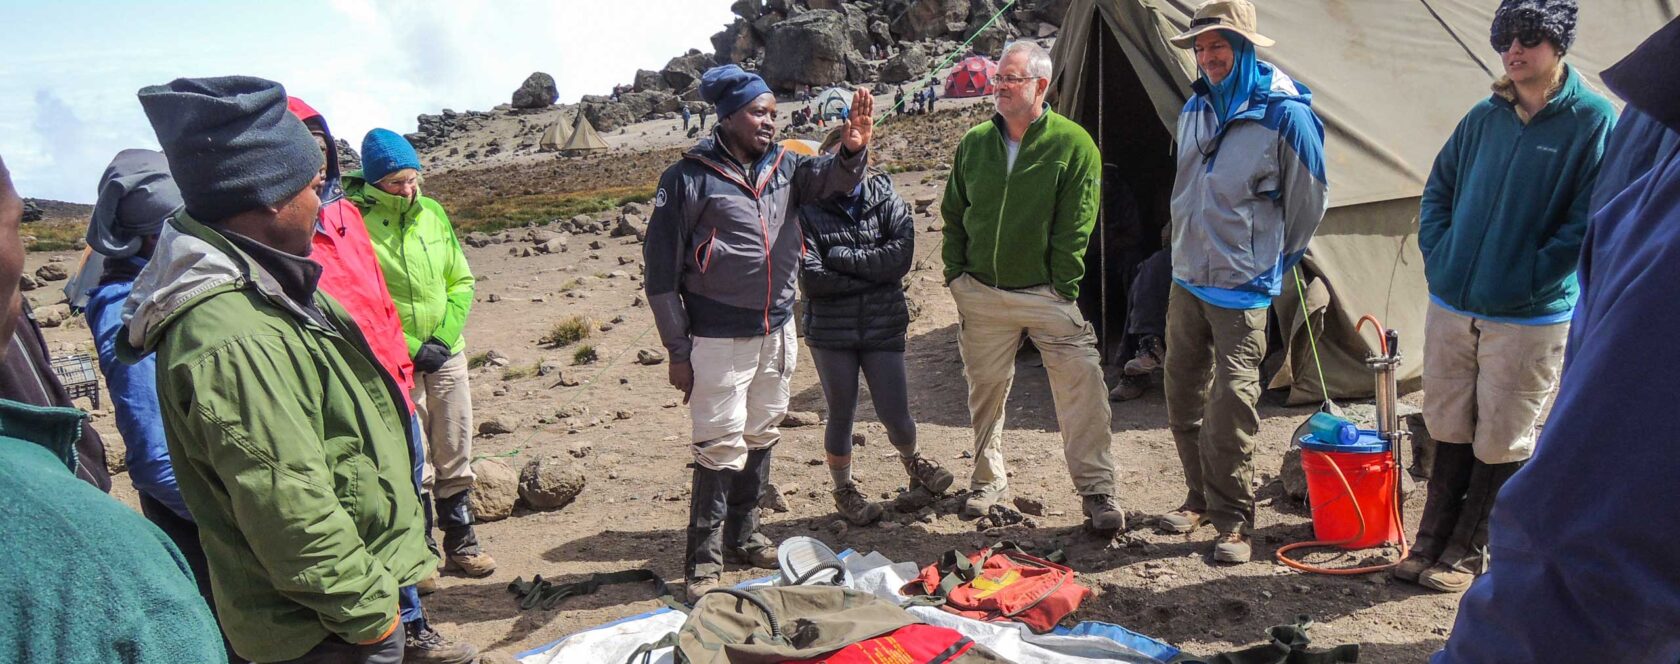 A safety demonstration in Kilimanjaro.